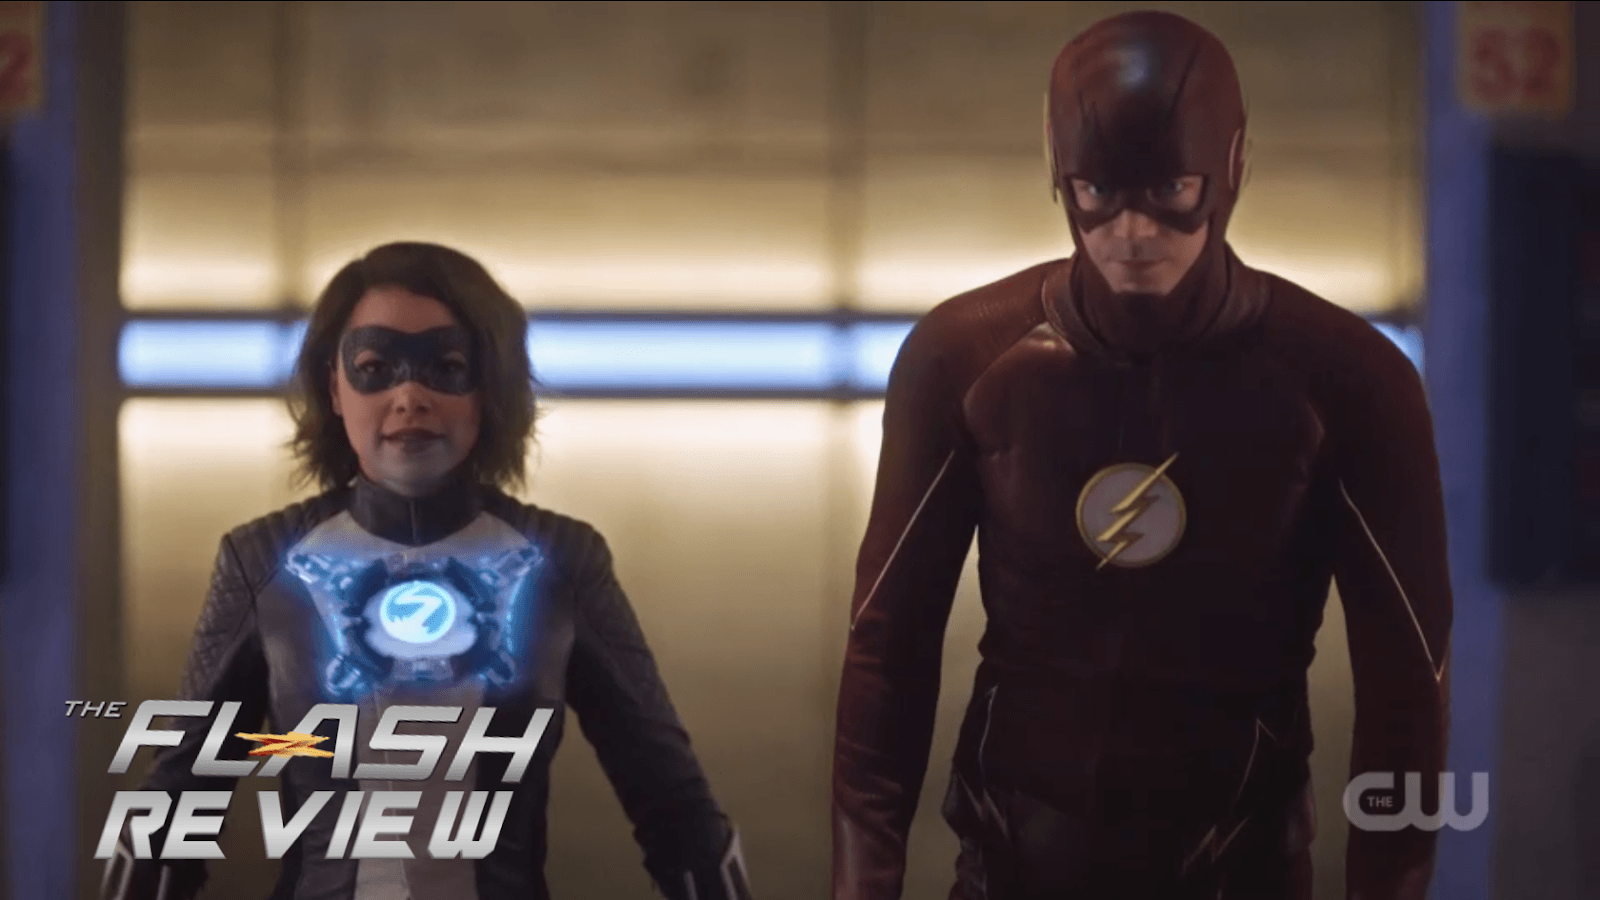 THE FLASH NORA REVIEW